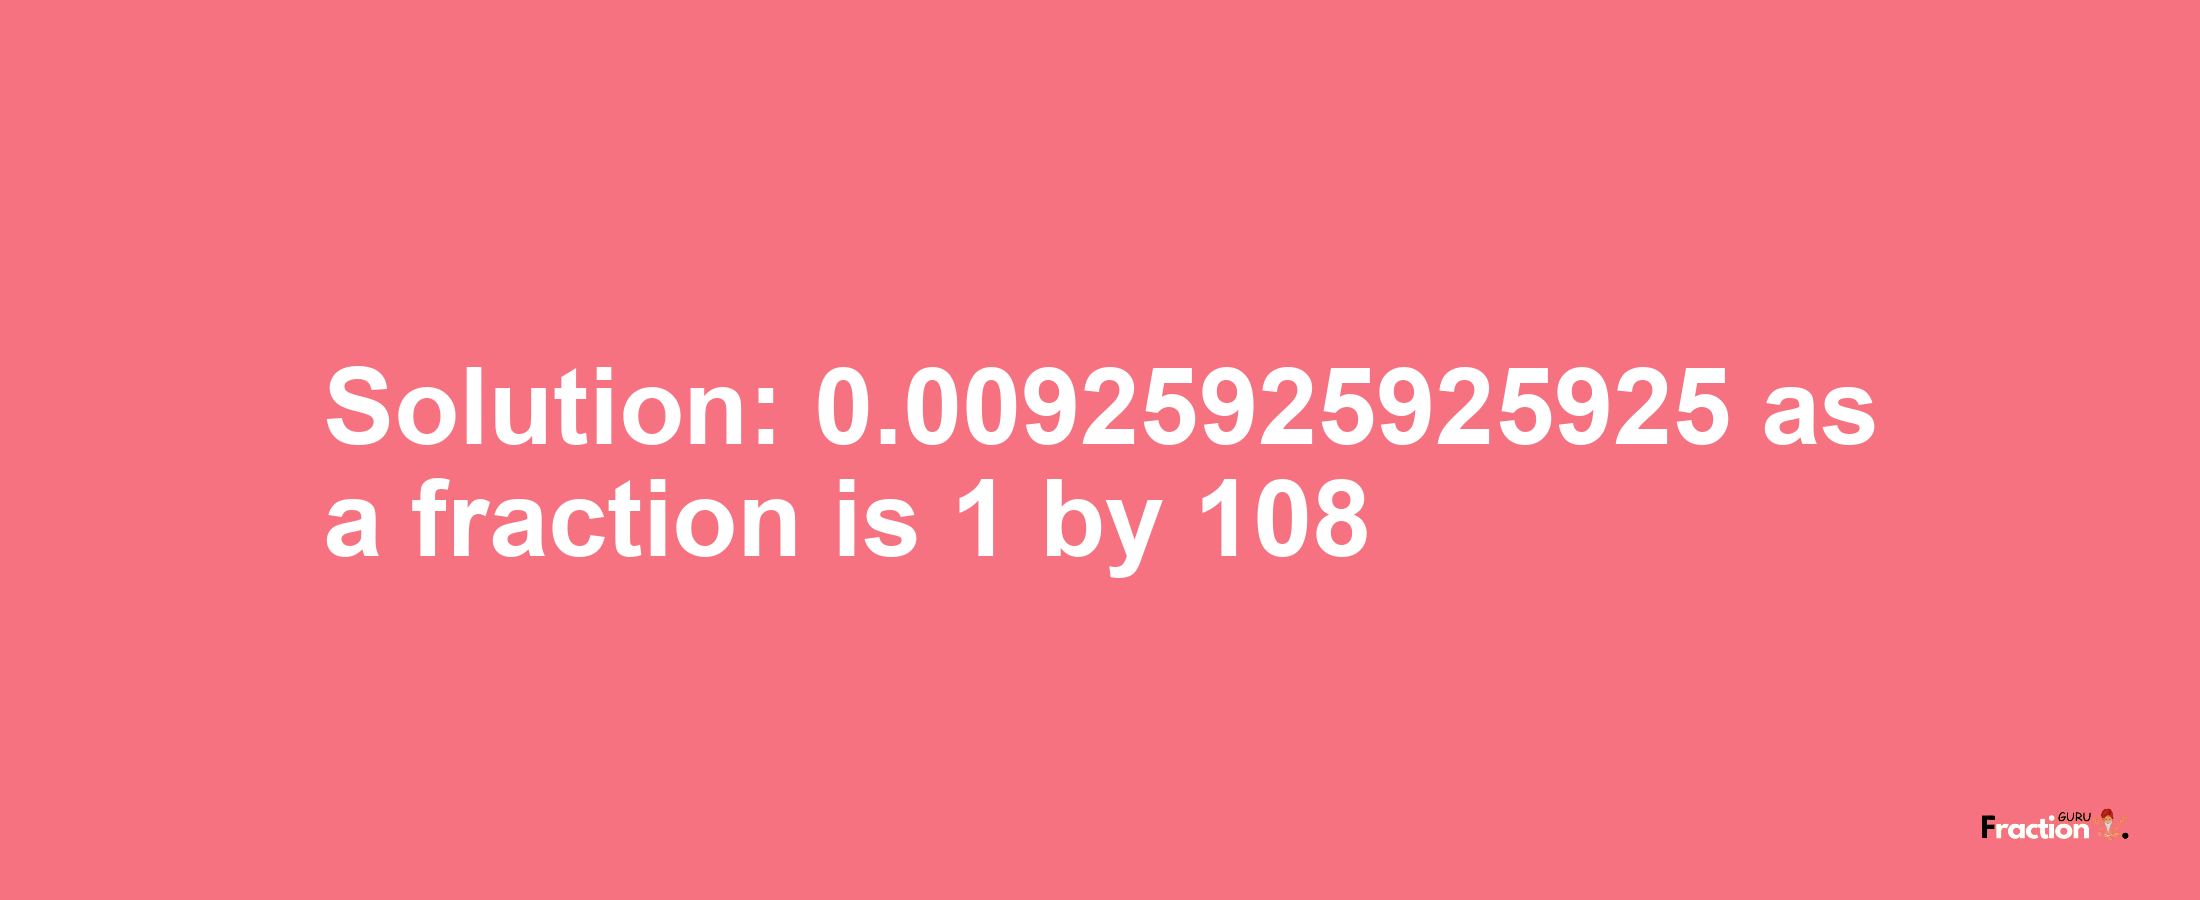 Solution:0.00925925925925 as a fraction is 1/108